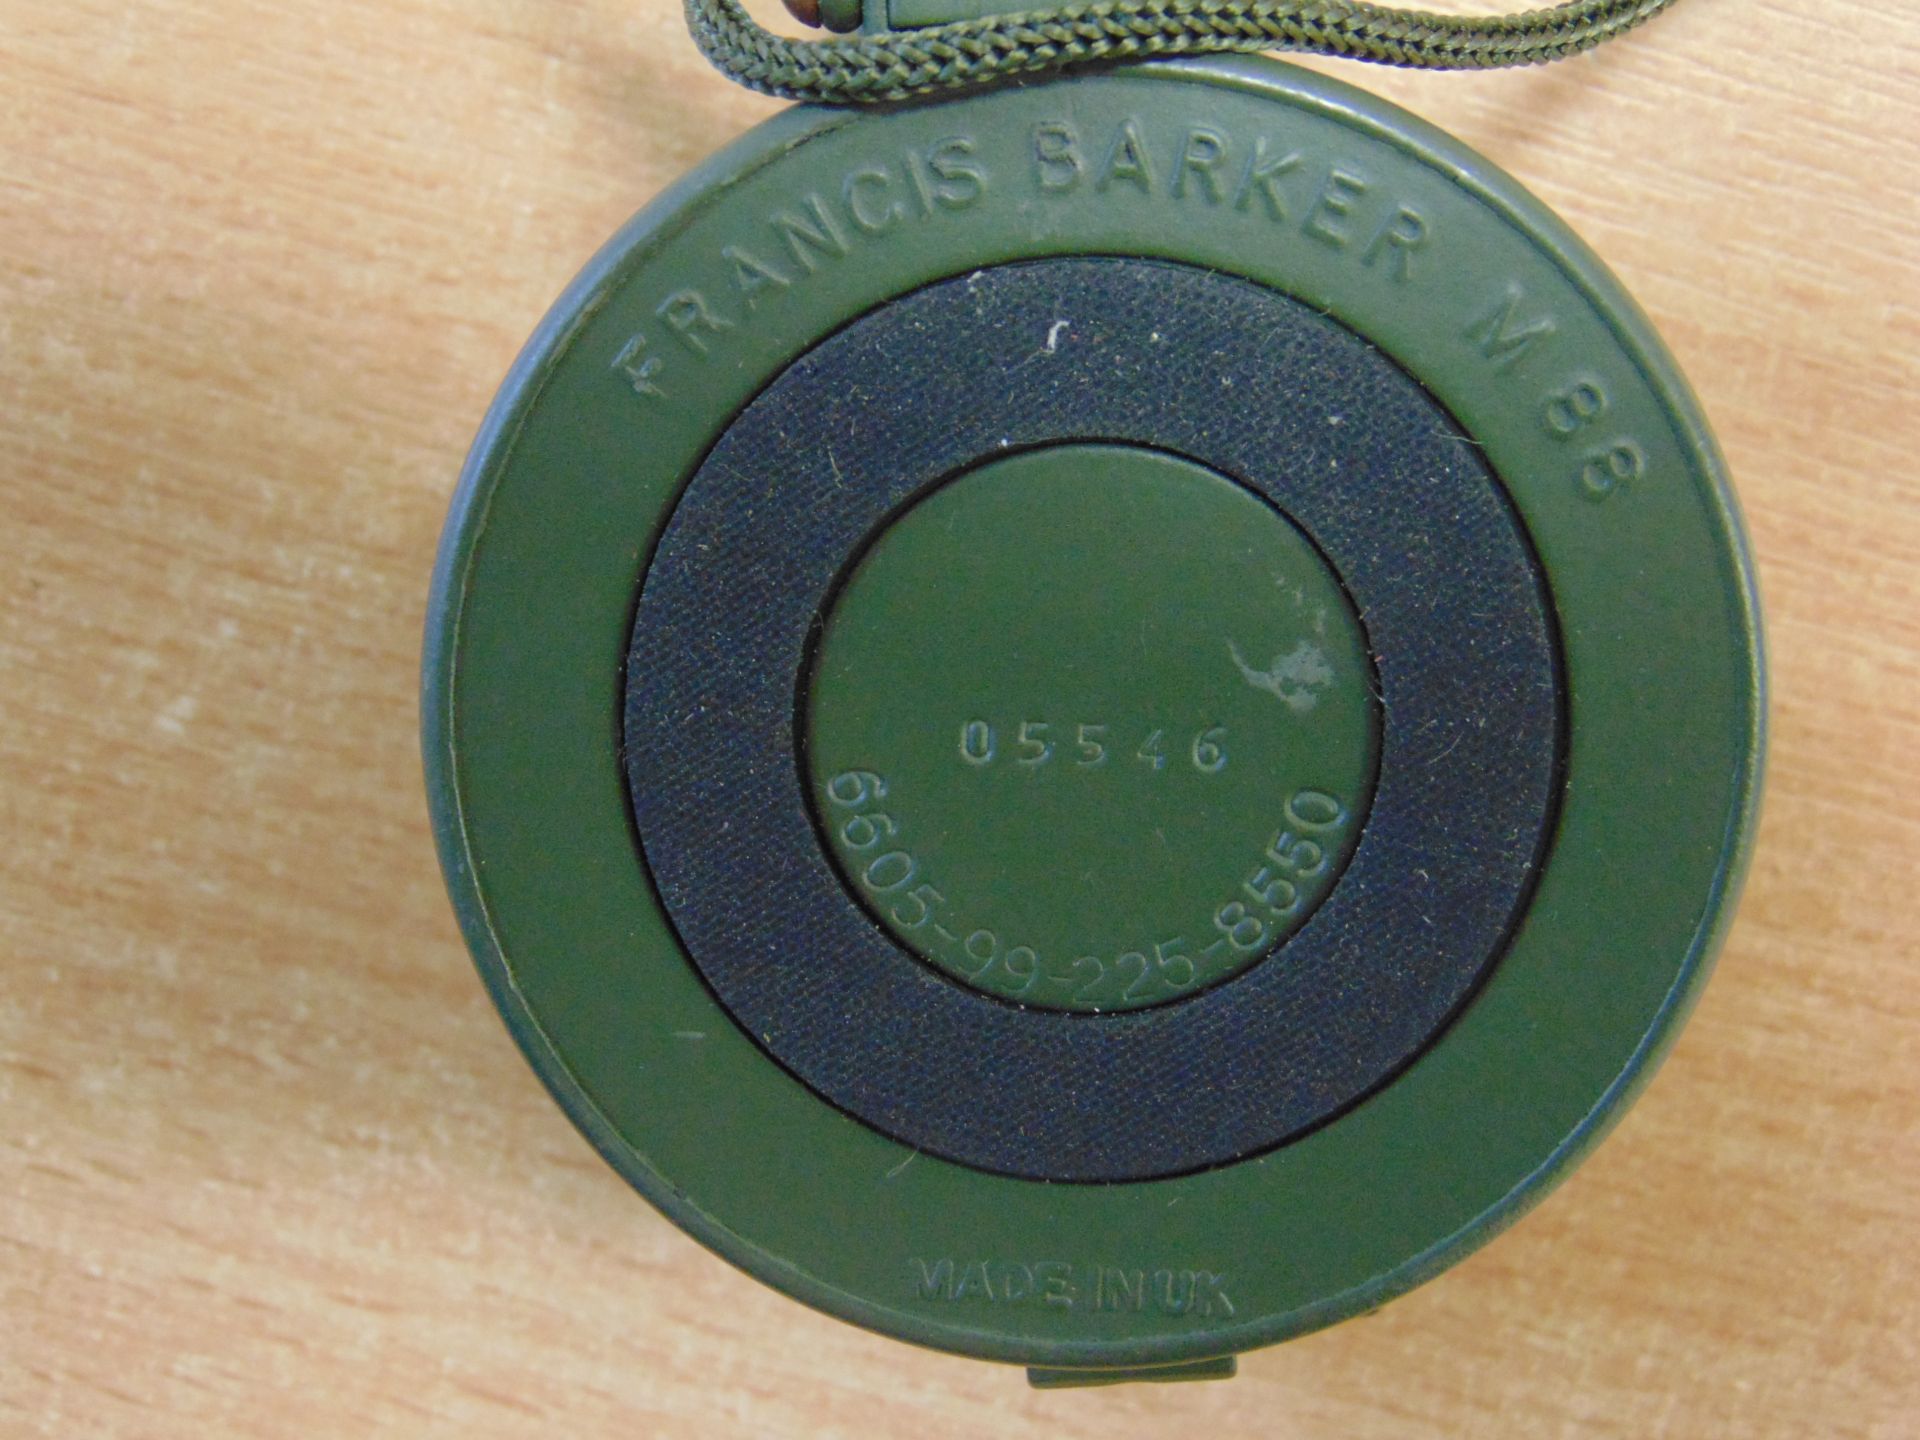 NEW UNISSUED FRANCIS BAKER M88 BRITISH ARMY PRISMATIC COMPASS NATO MARKS IN MILS - Image 5 of 6